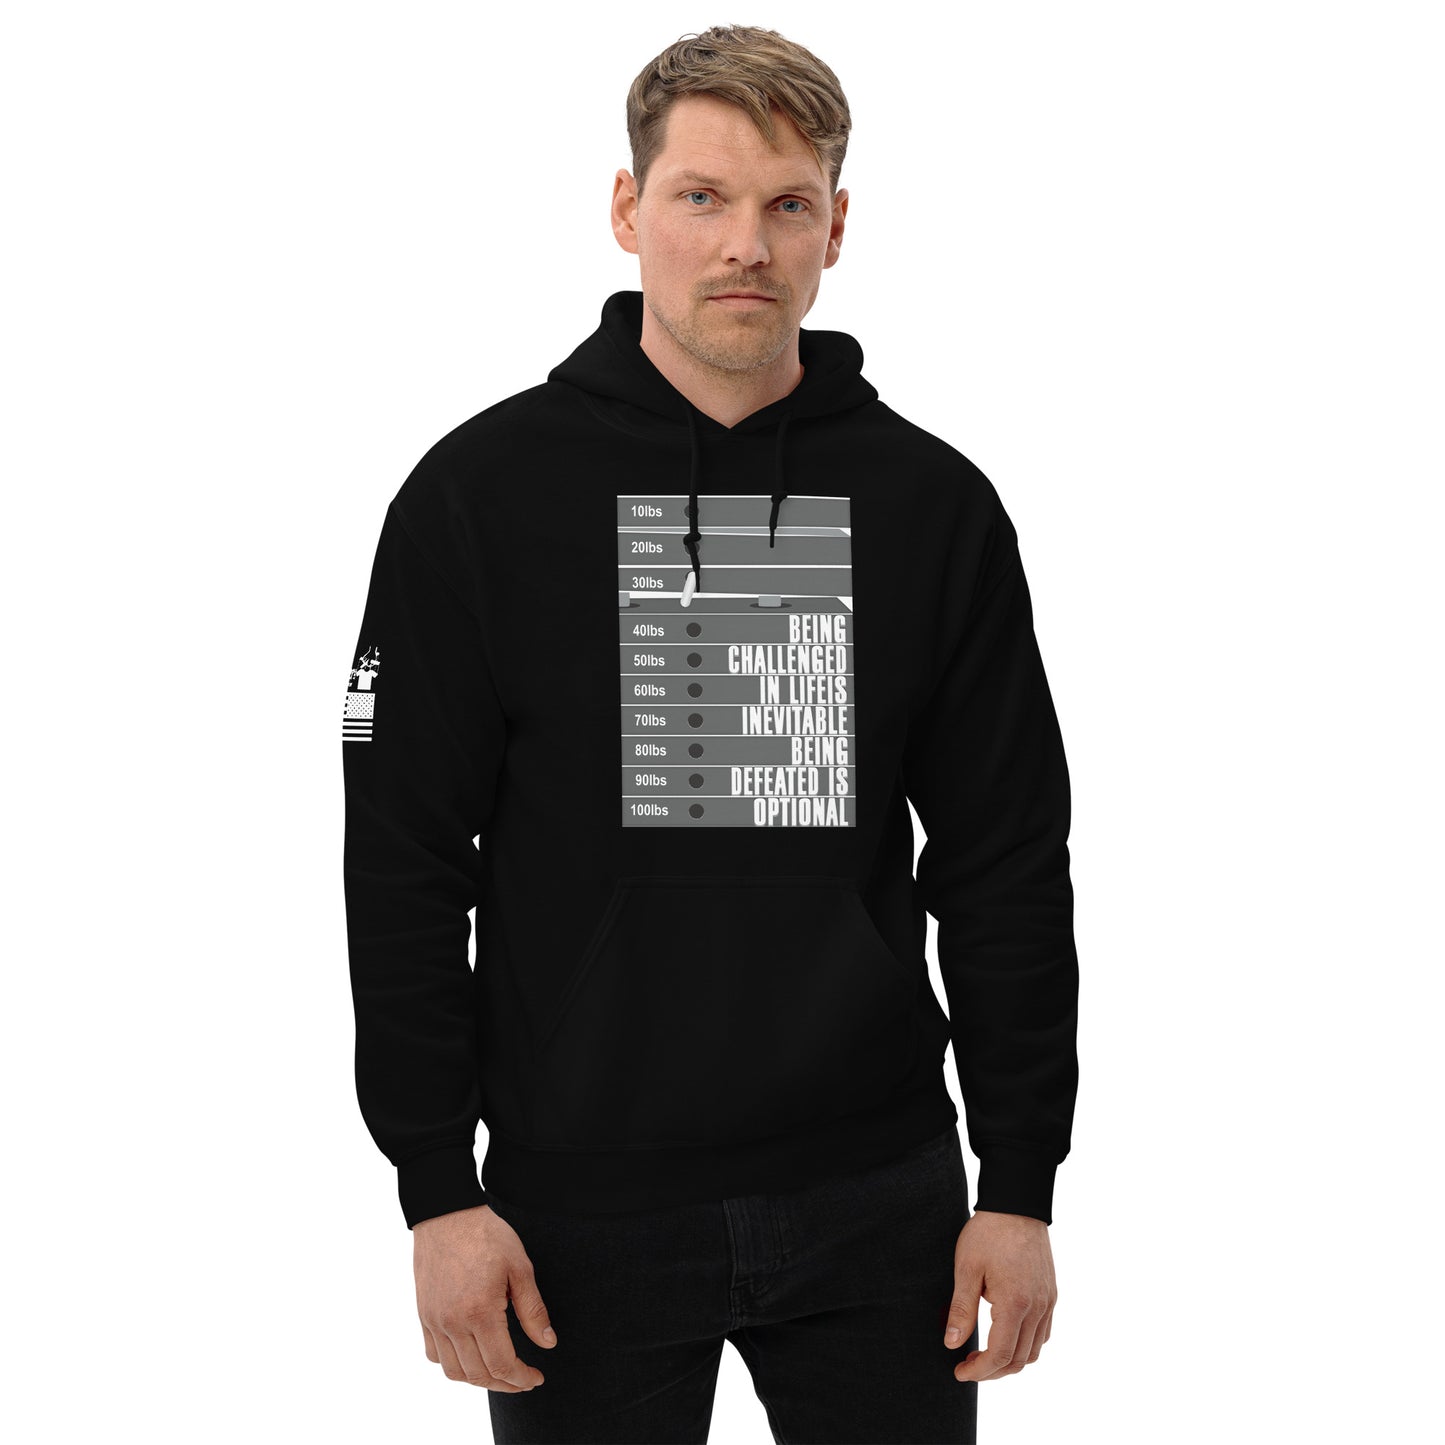 Defeat is optional - Hoodie (unisex) | TheShirtfather